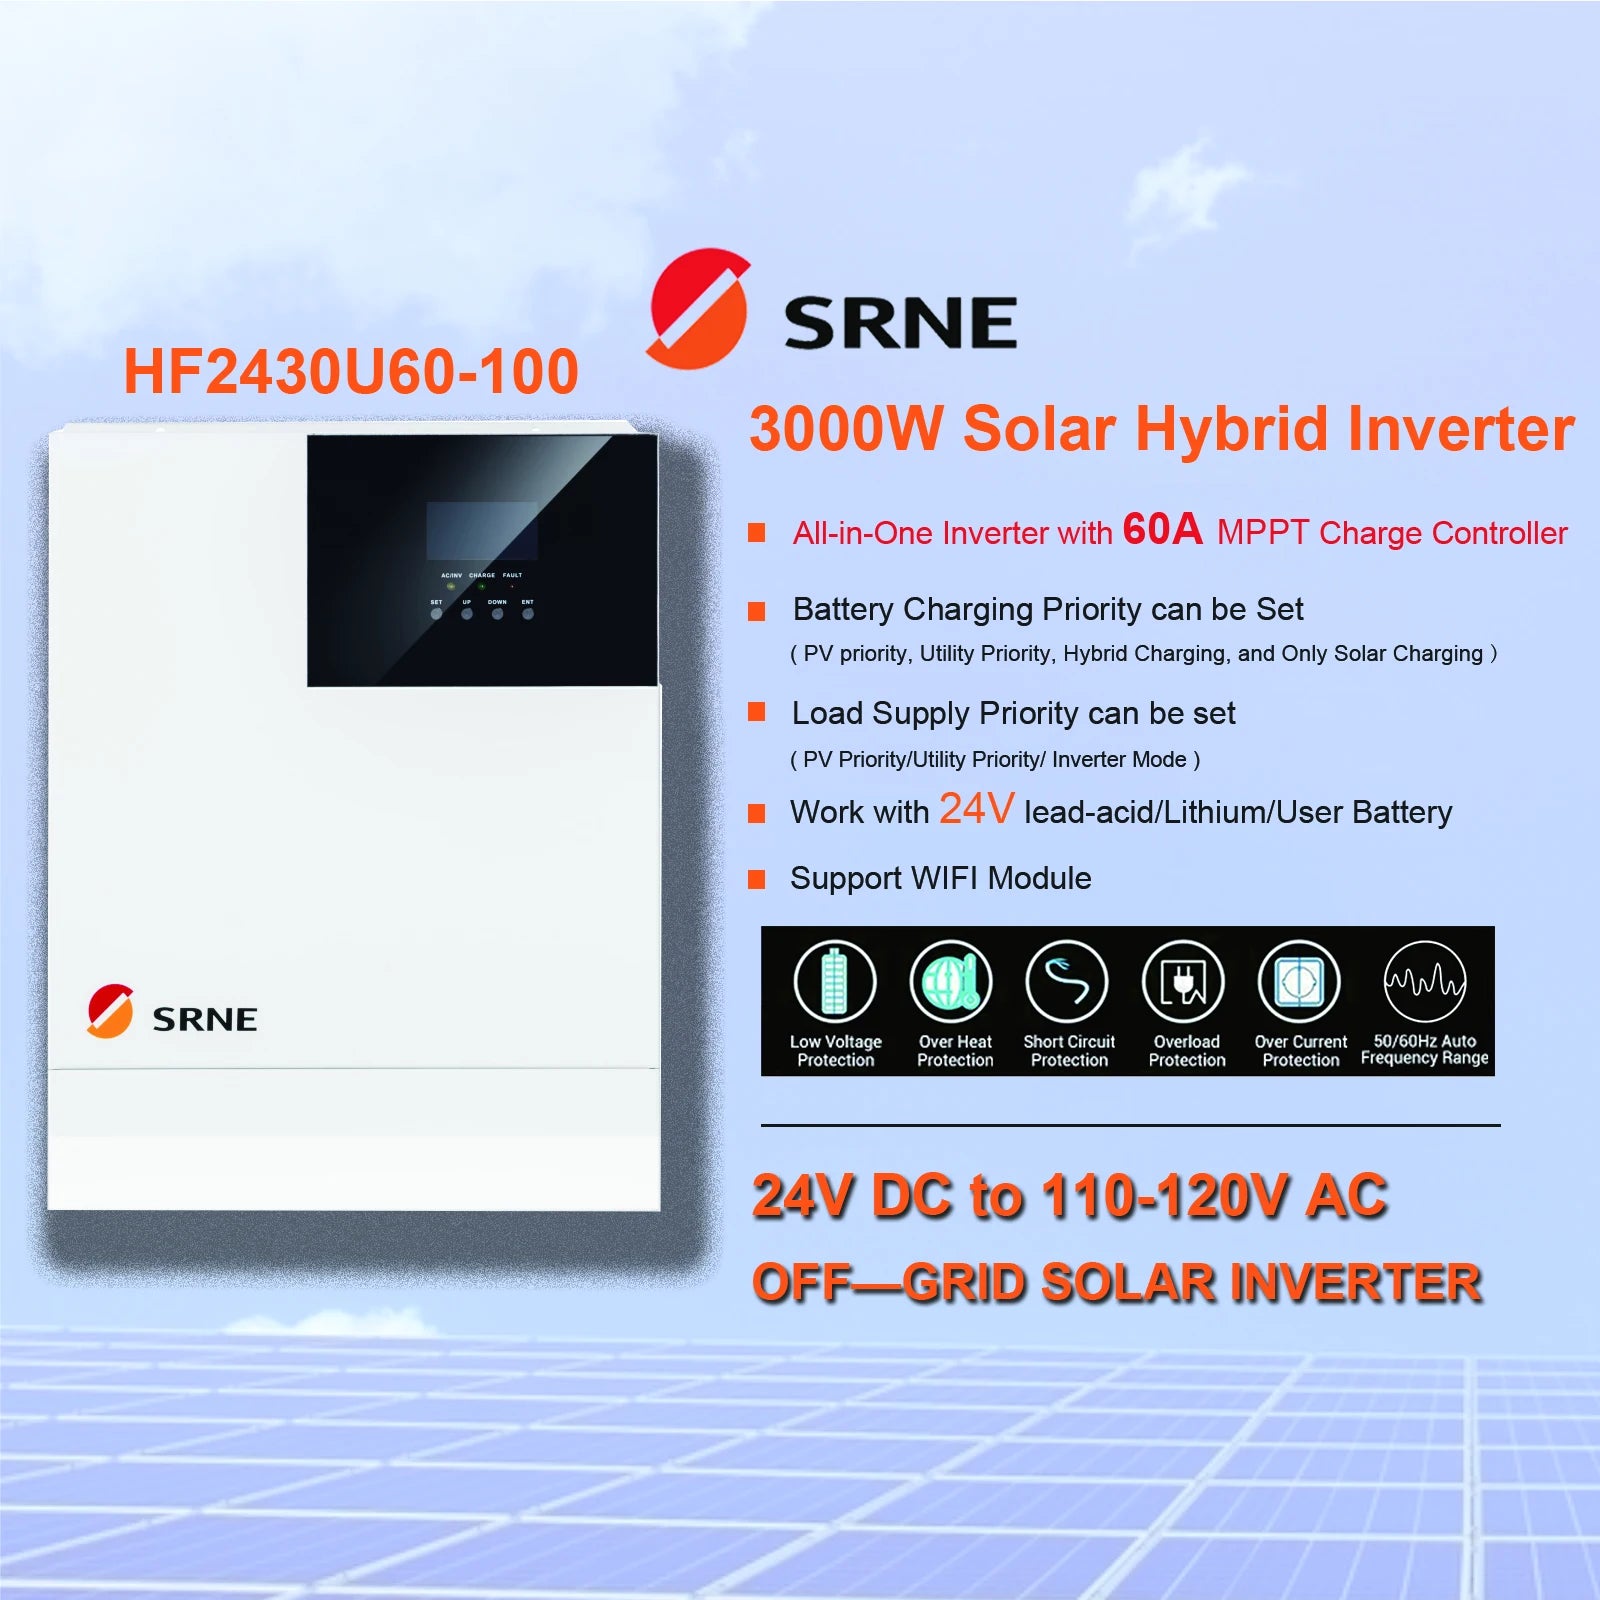 SRNE HF2430U60 all-in-one solar hybrid inverter with WiFi connectivity and various priority settings.